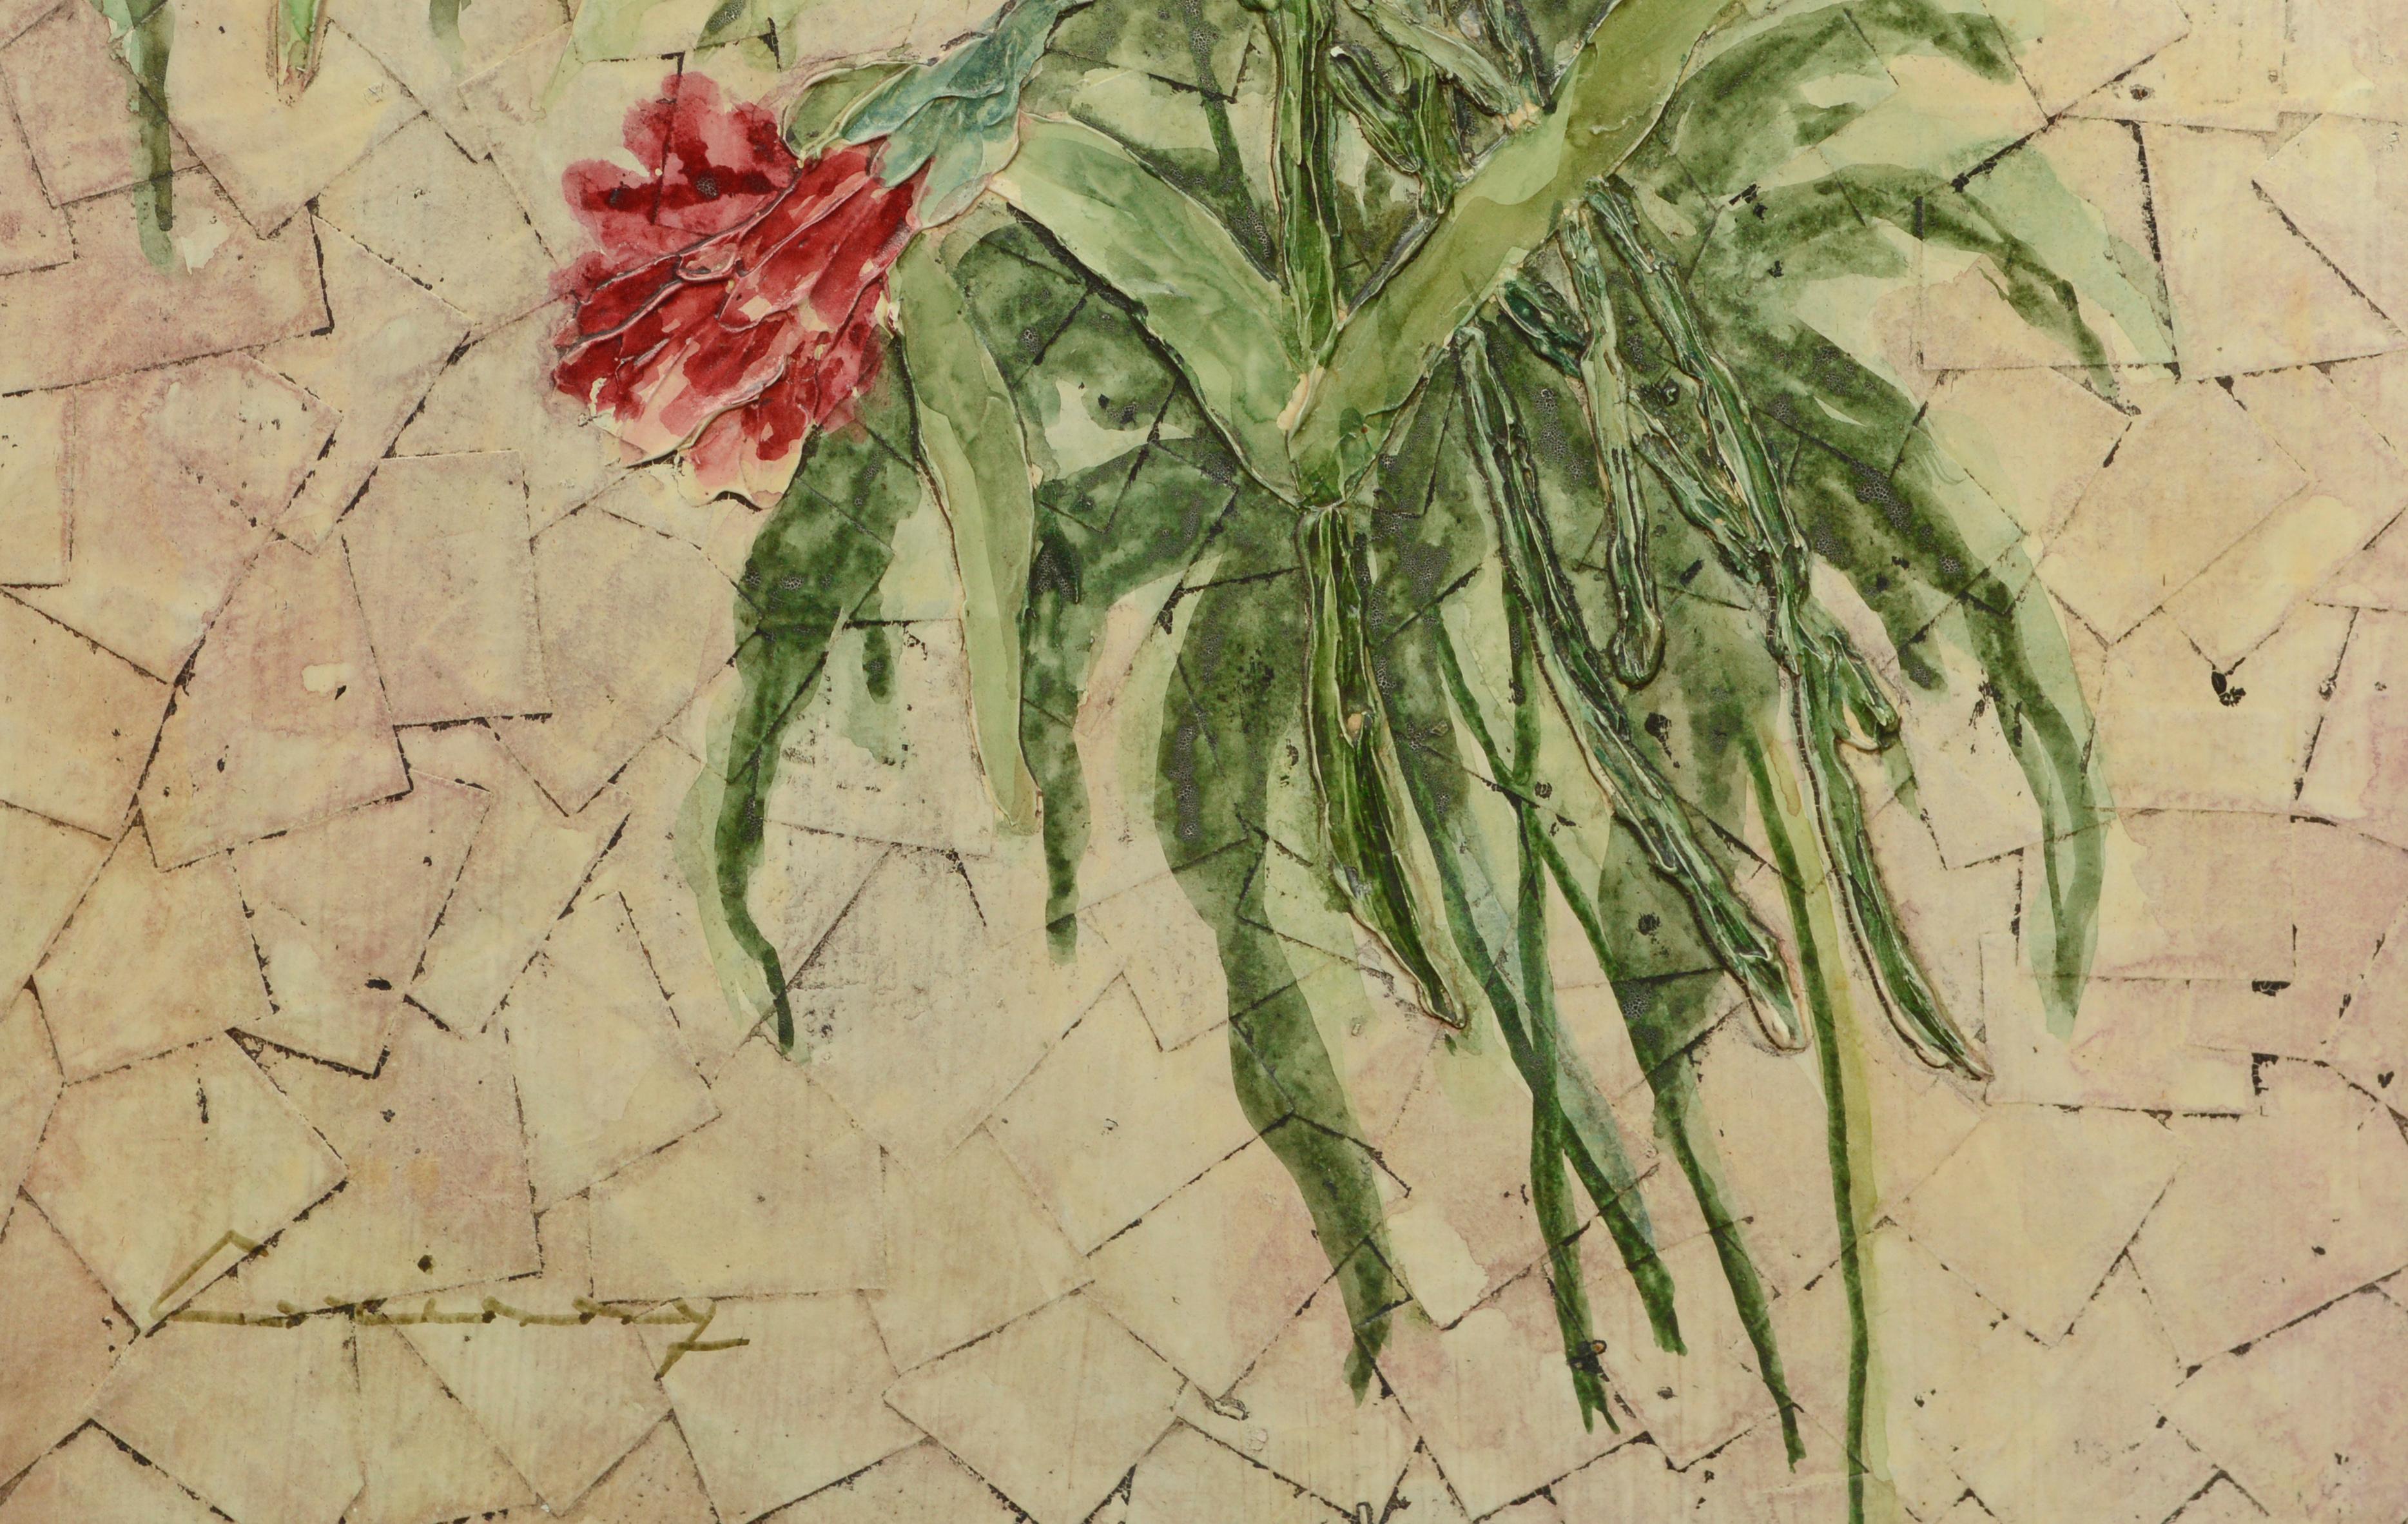 Red Carnations, Mid Century Textured Floral Bouquet Still Life - American Impressionist Painting by Unknown